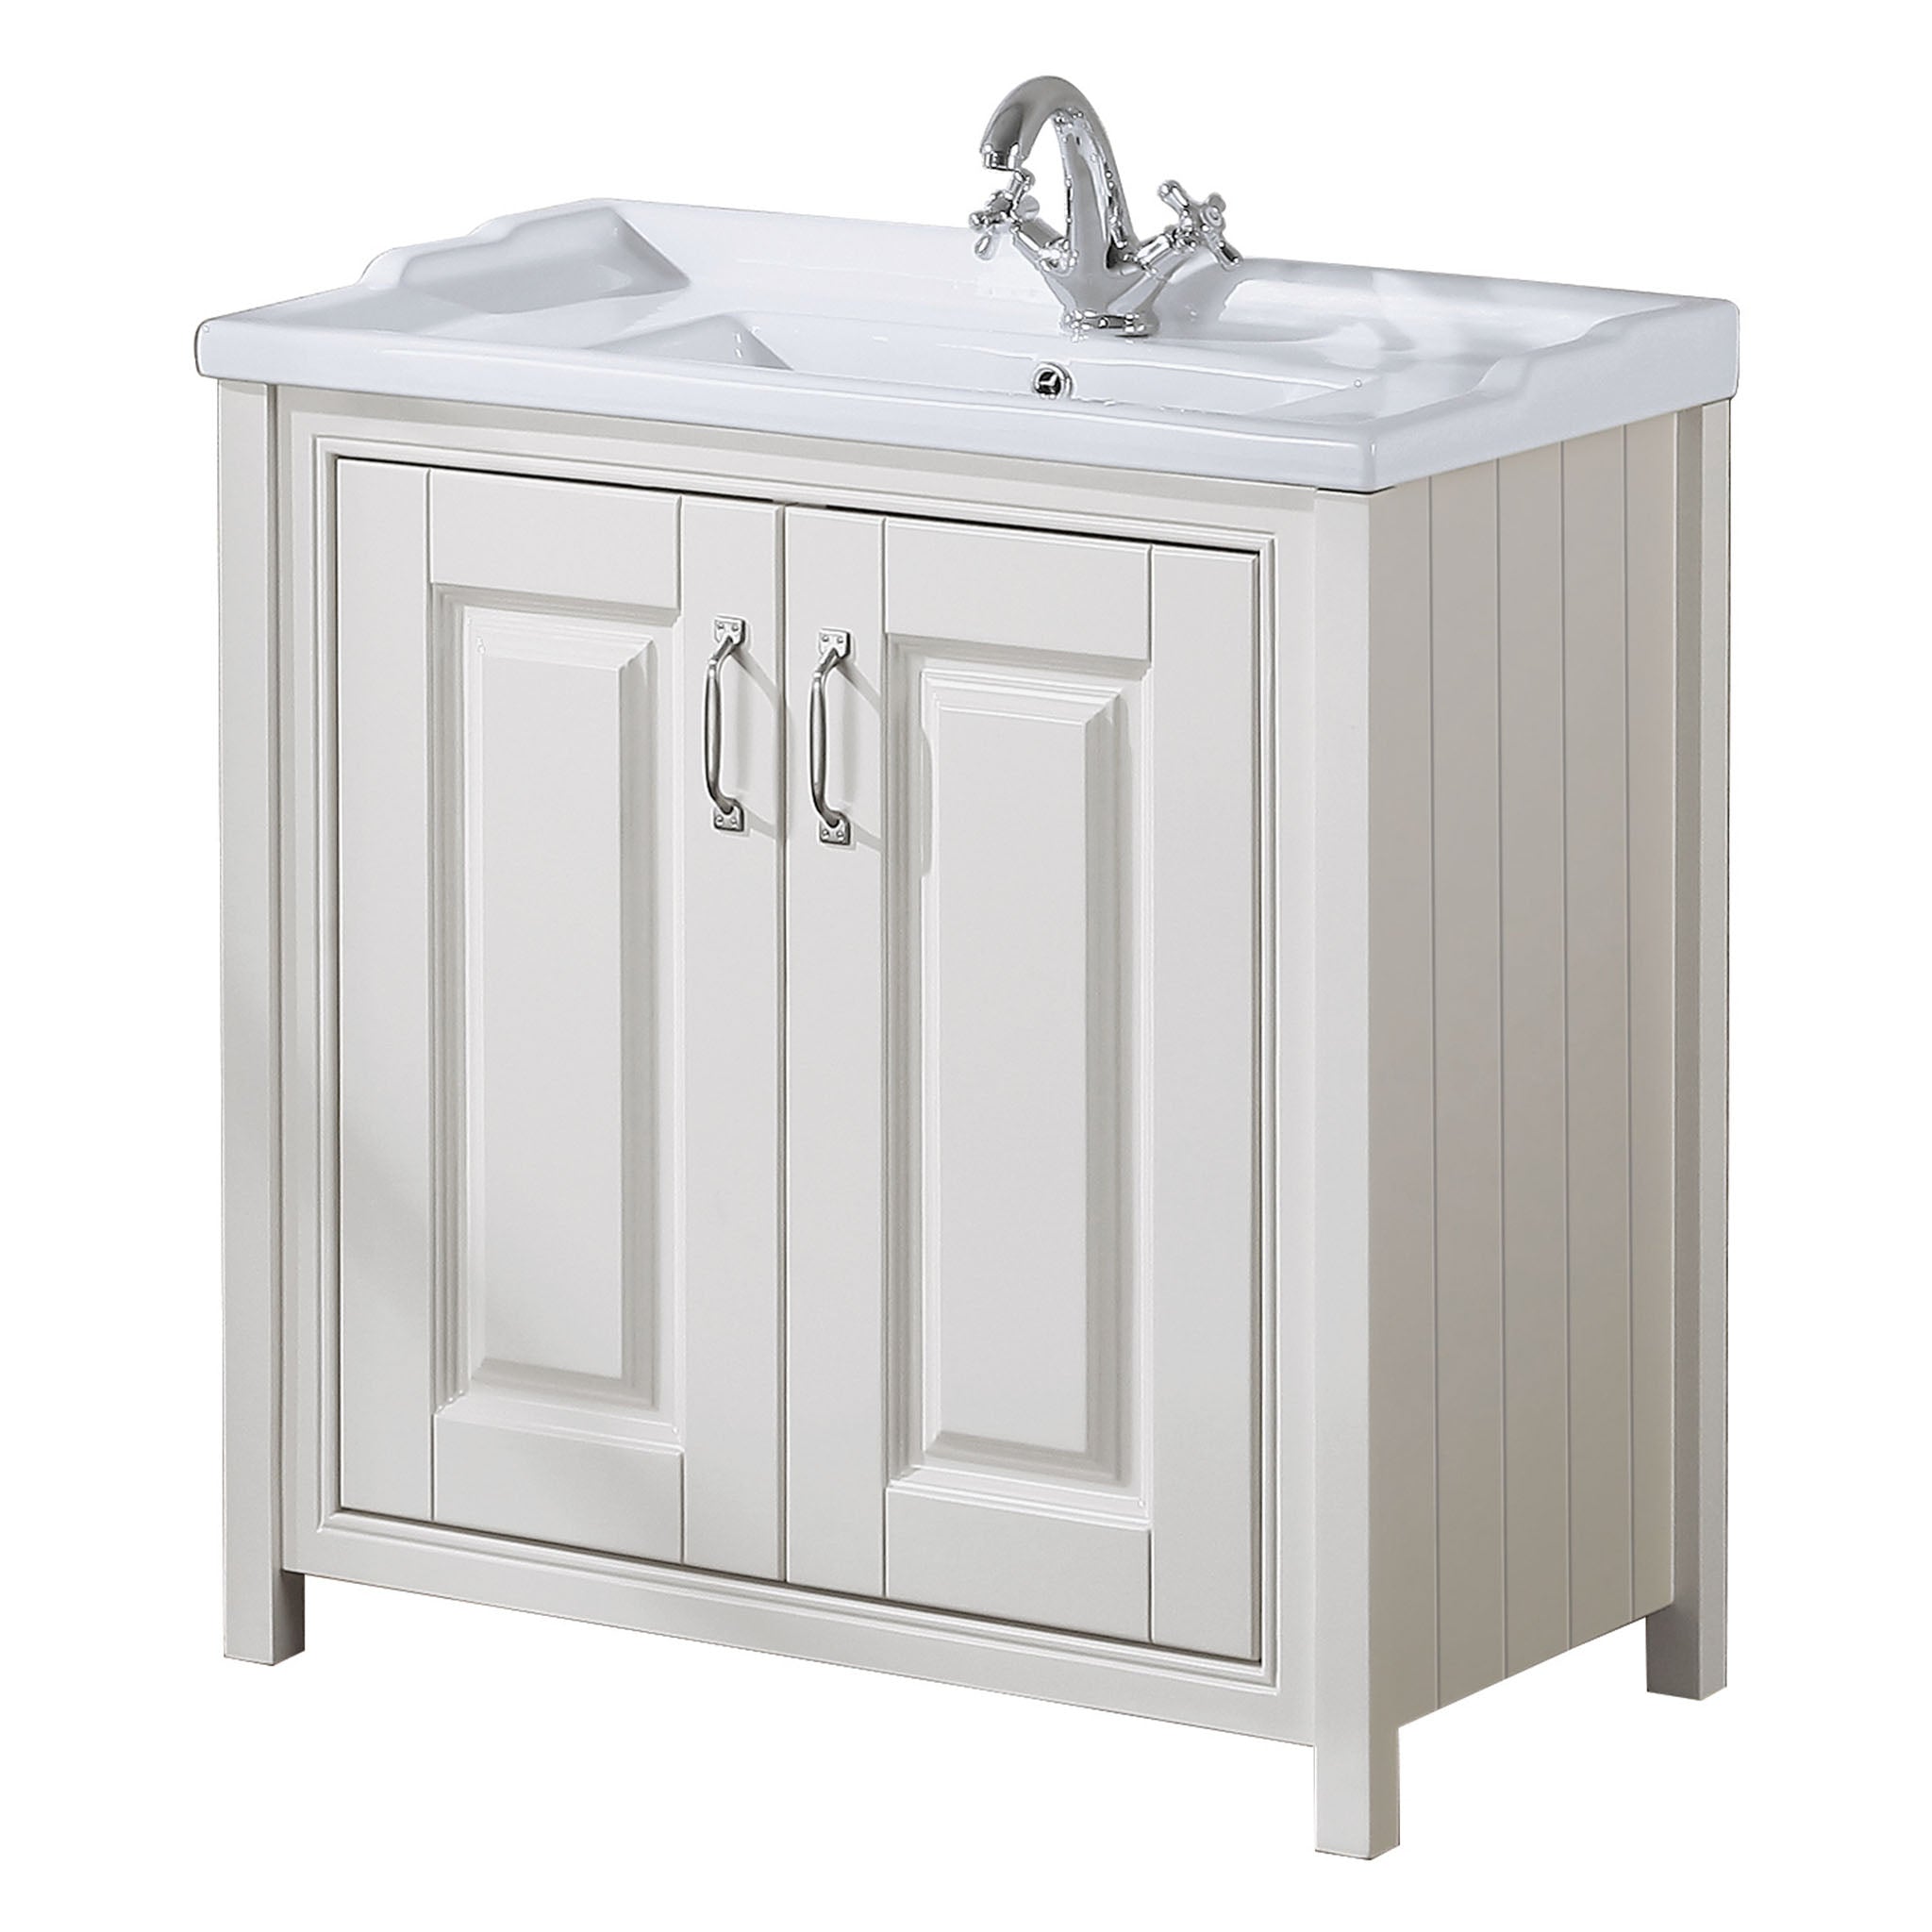 MyLife Clearance Cottage 800mm 2 Door Floor Mounted Unit & Basin